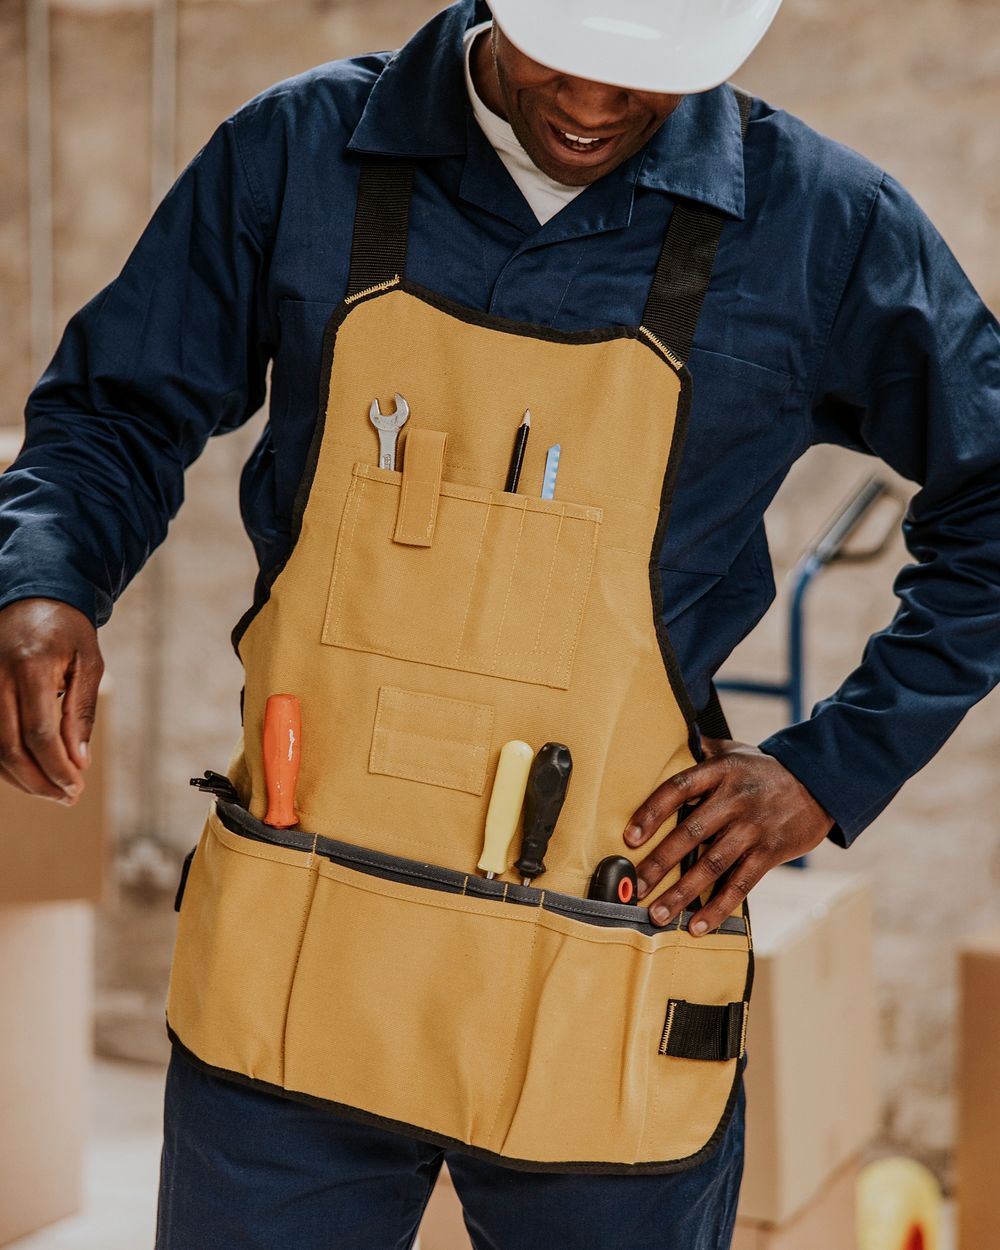 Construction worker wearing handyman apron with tools